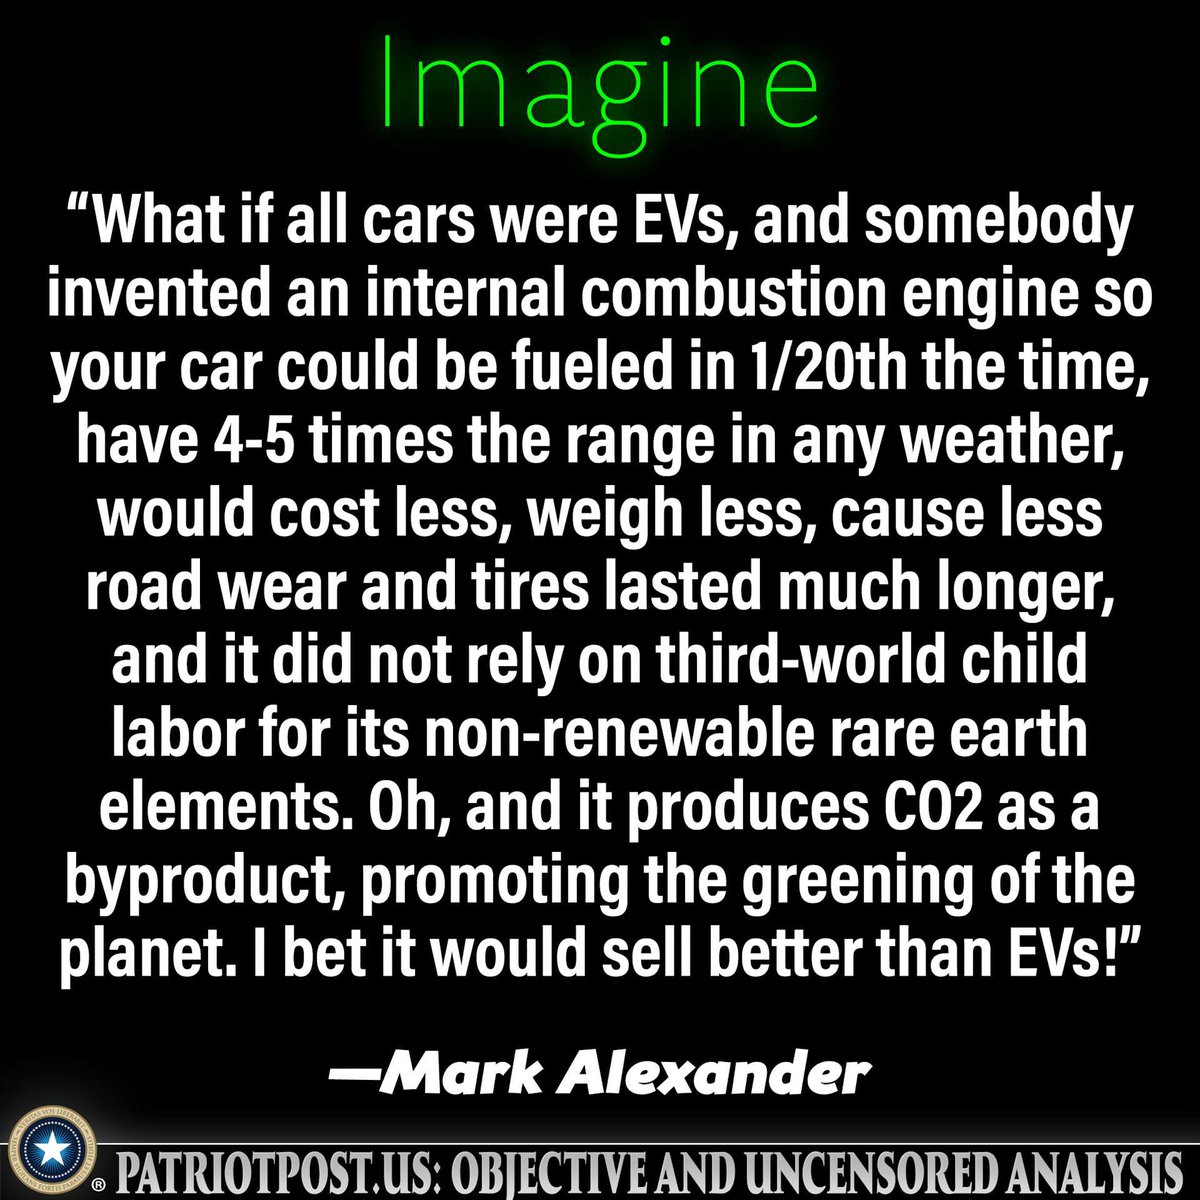 Truth right there. If this is how it went, we would be done with this ridiculous EV thing!